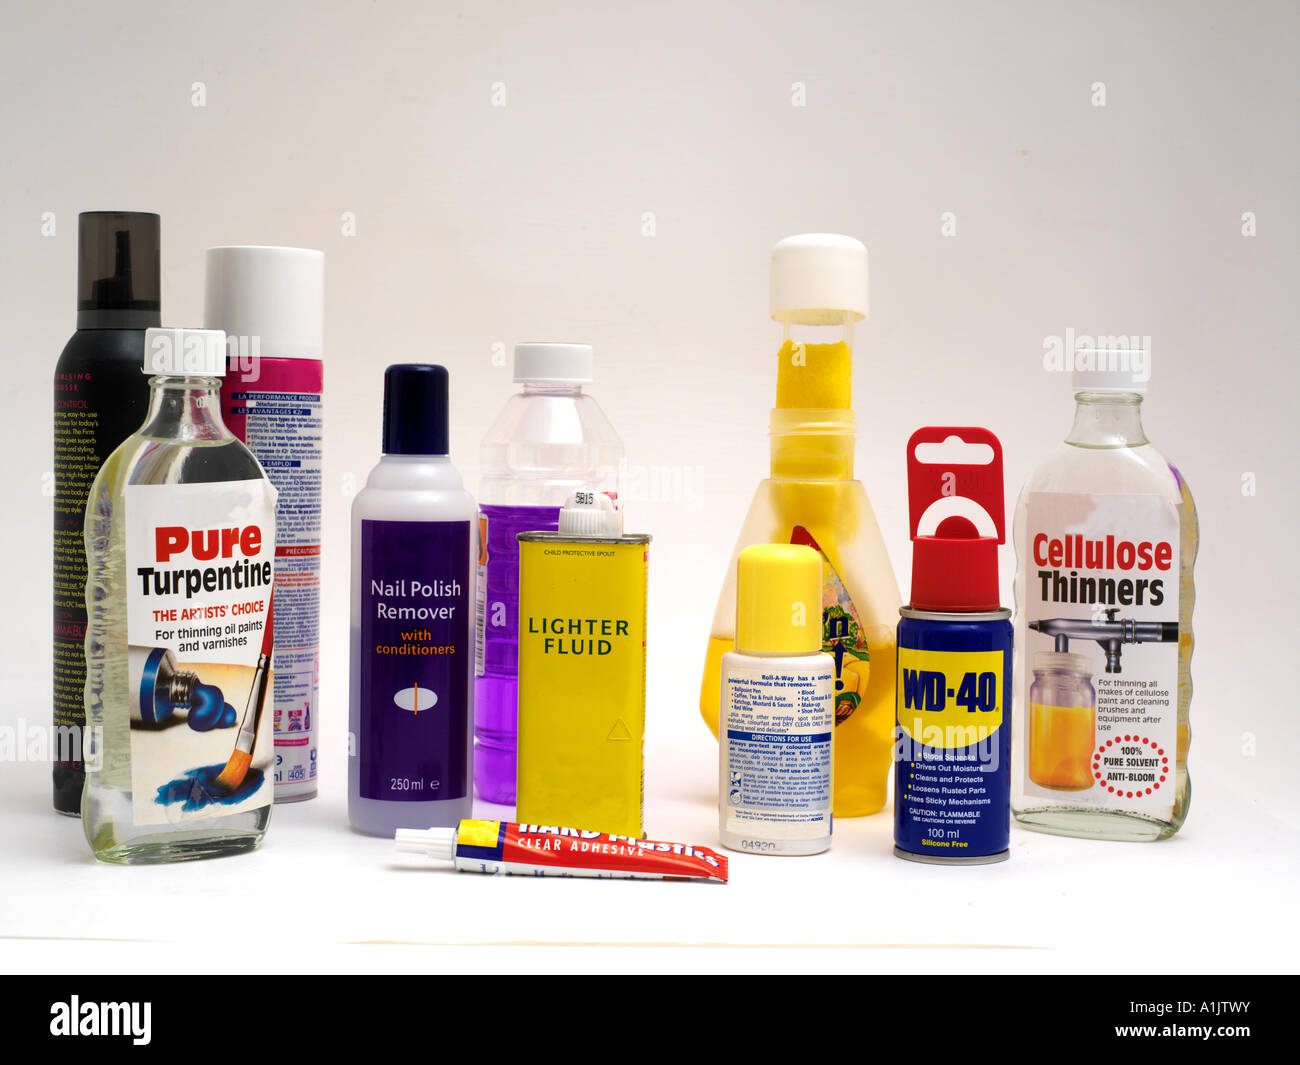 Household Products that can be used as Inhalants Stock Photo